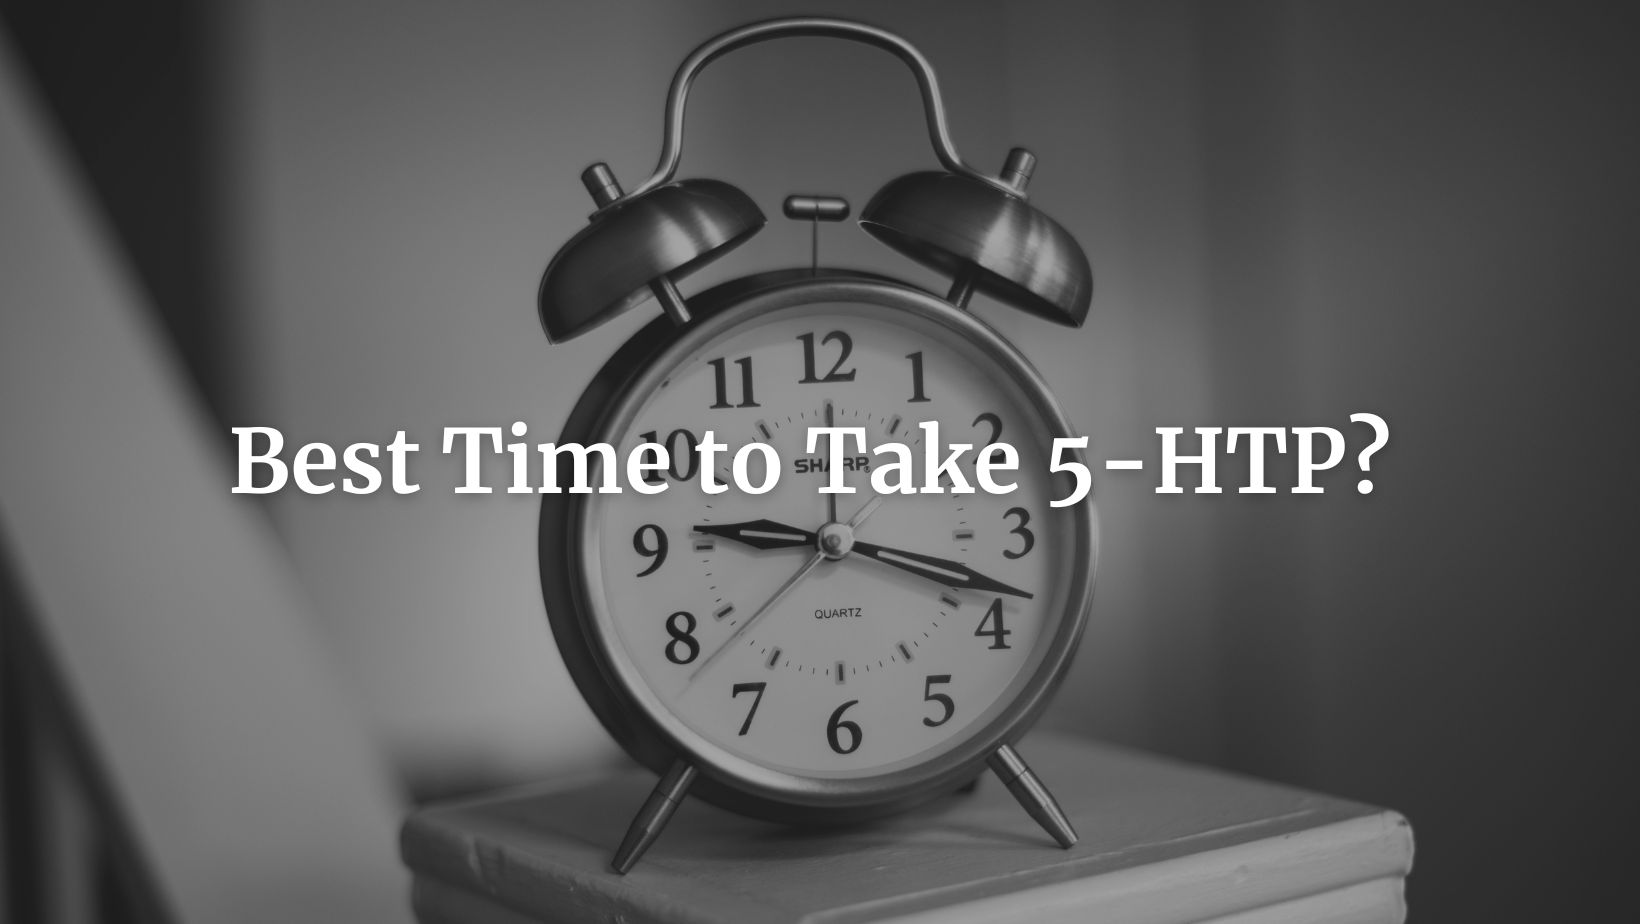 best time to take 5-htp featured image